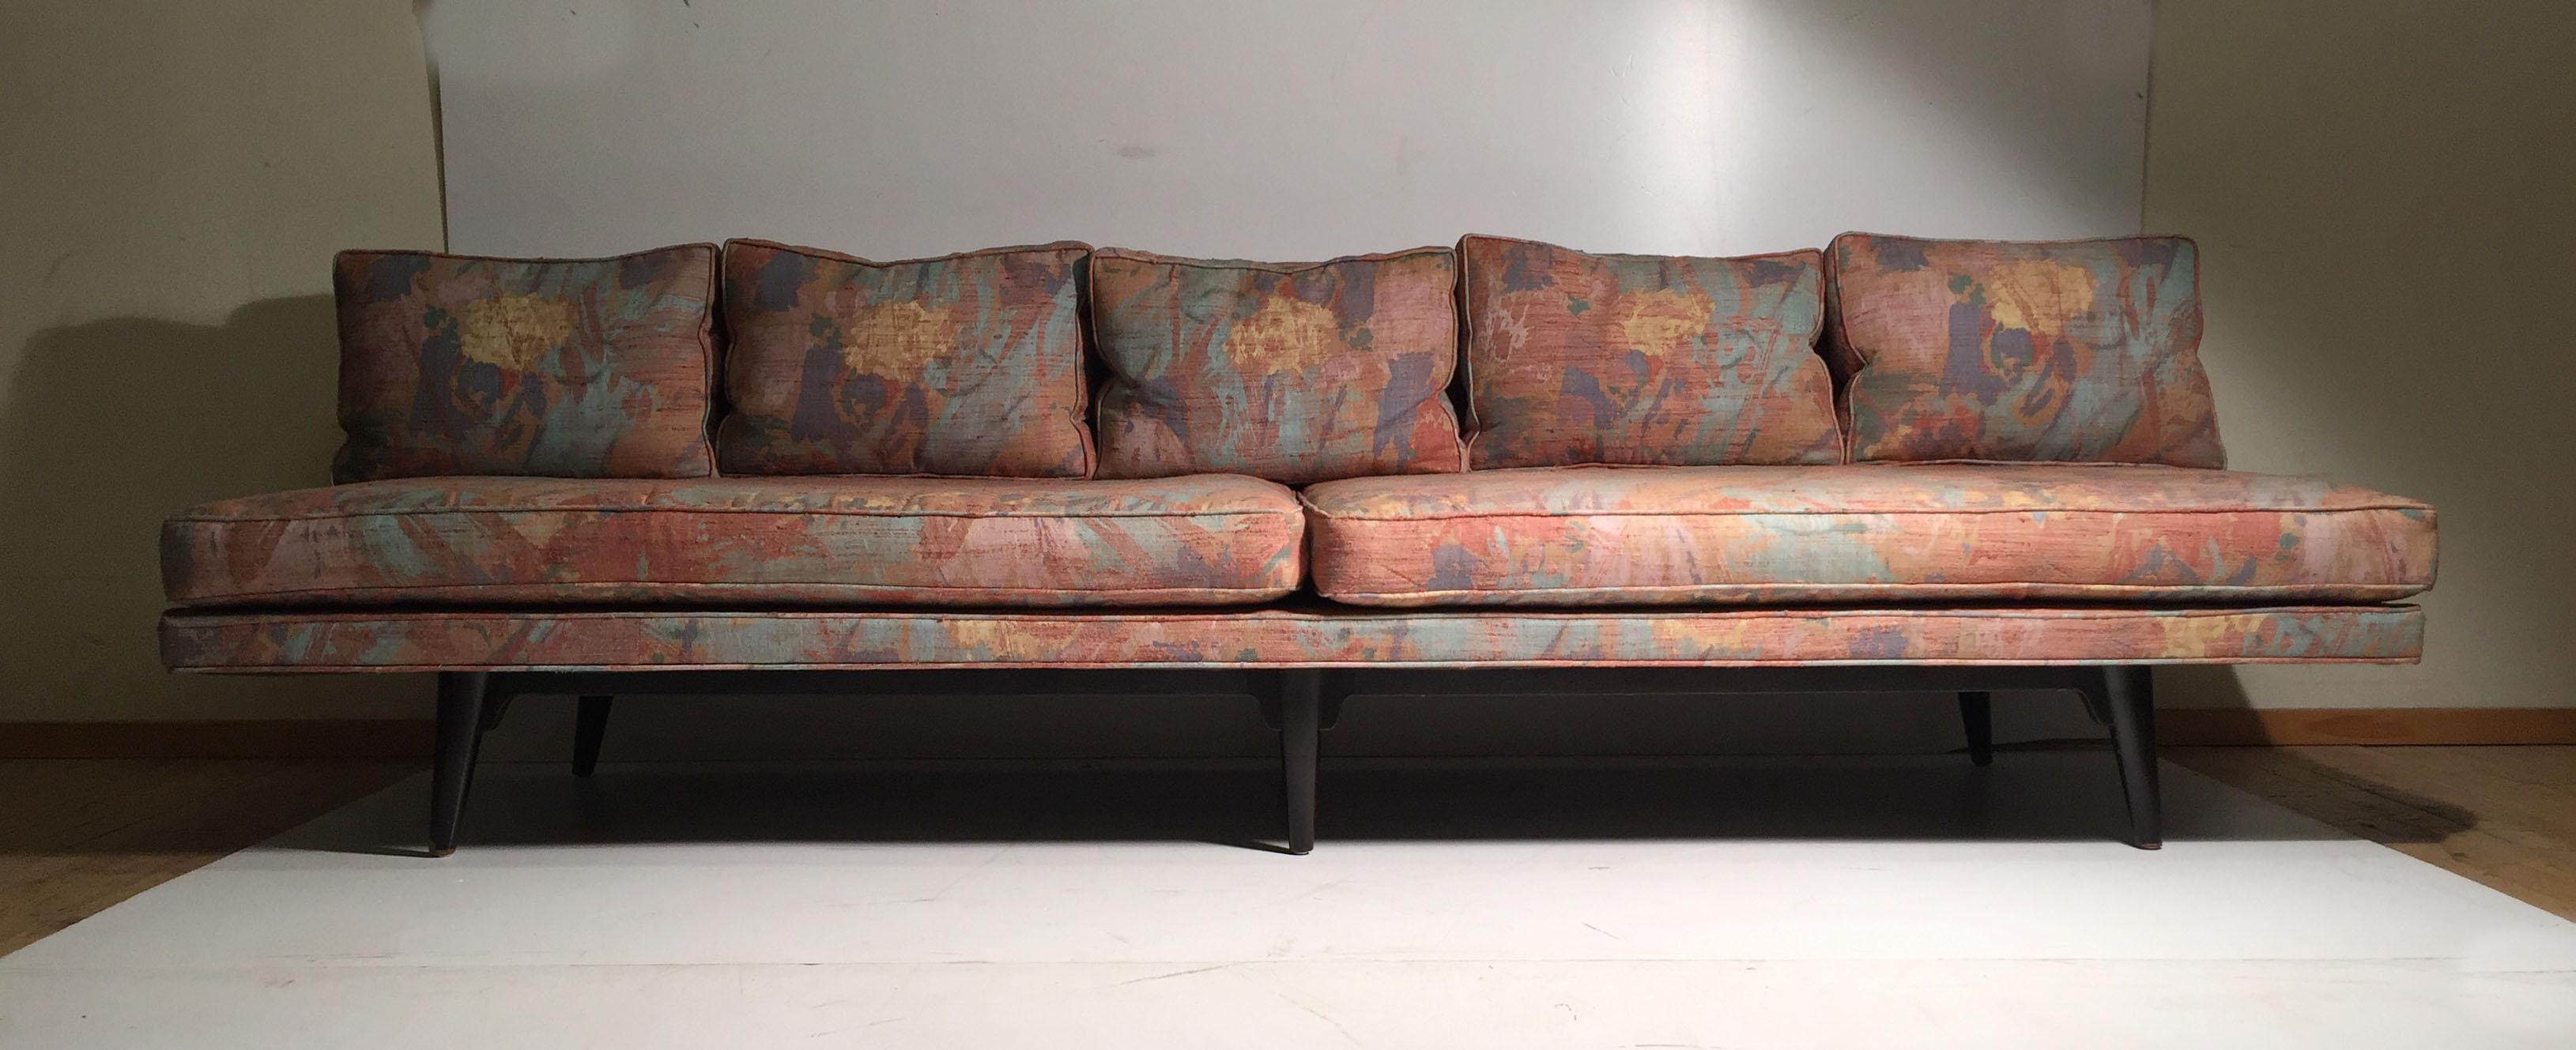 Edward Wormley Dunbar sofa can be paired as a sectional with matching chaise longue 5525 we have offered in another listing.